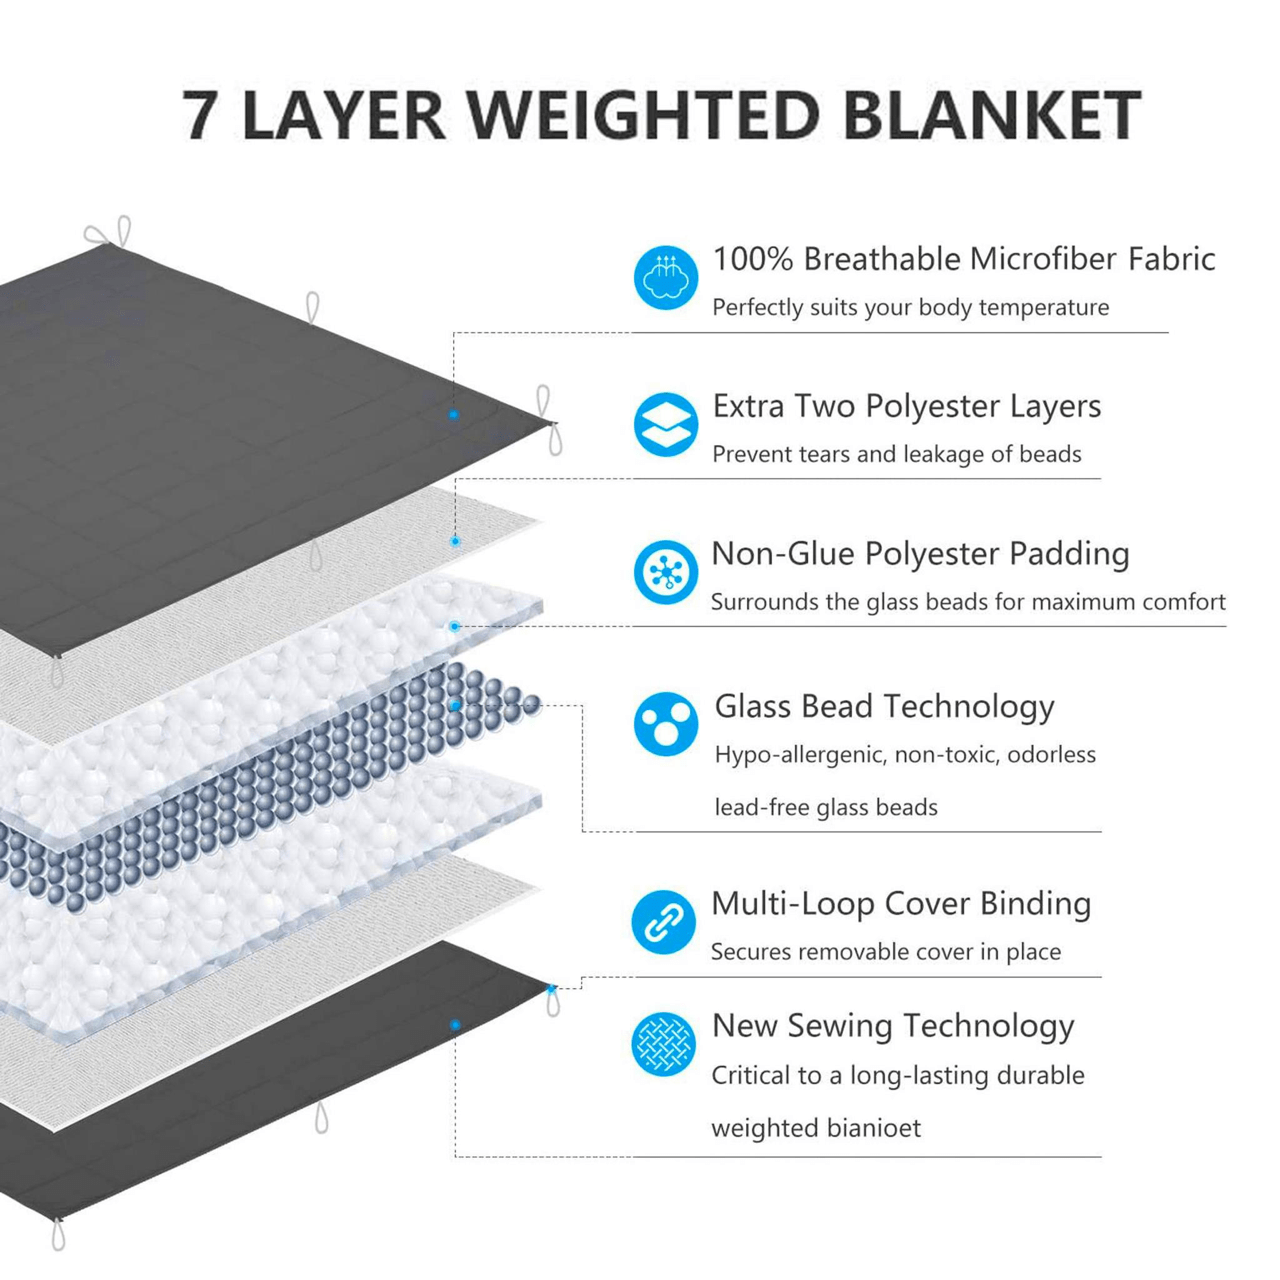 Weighted Blanket 125cm x 180cm 6kg Grey 4608 (Parcel Rate)